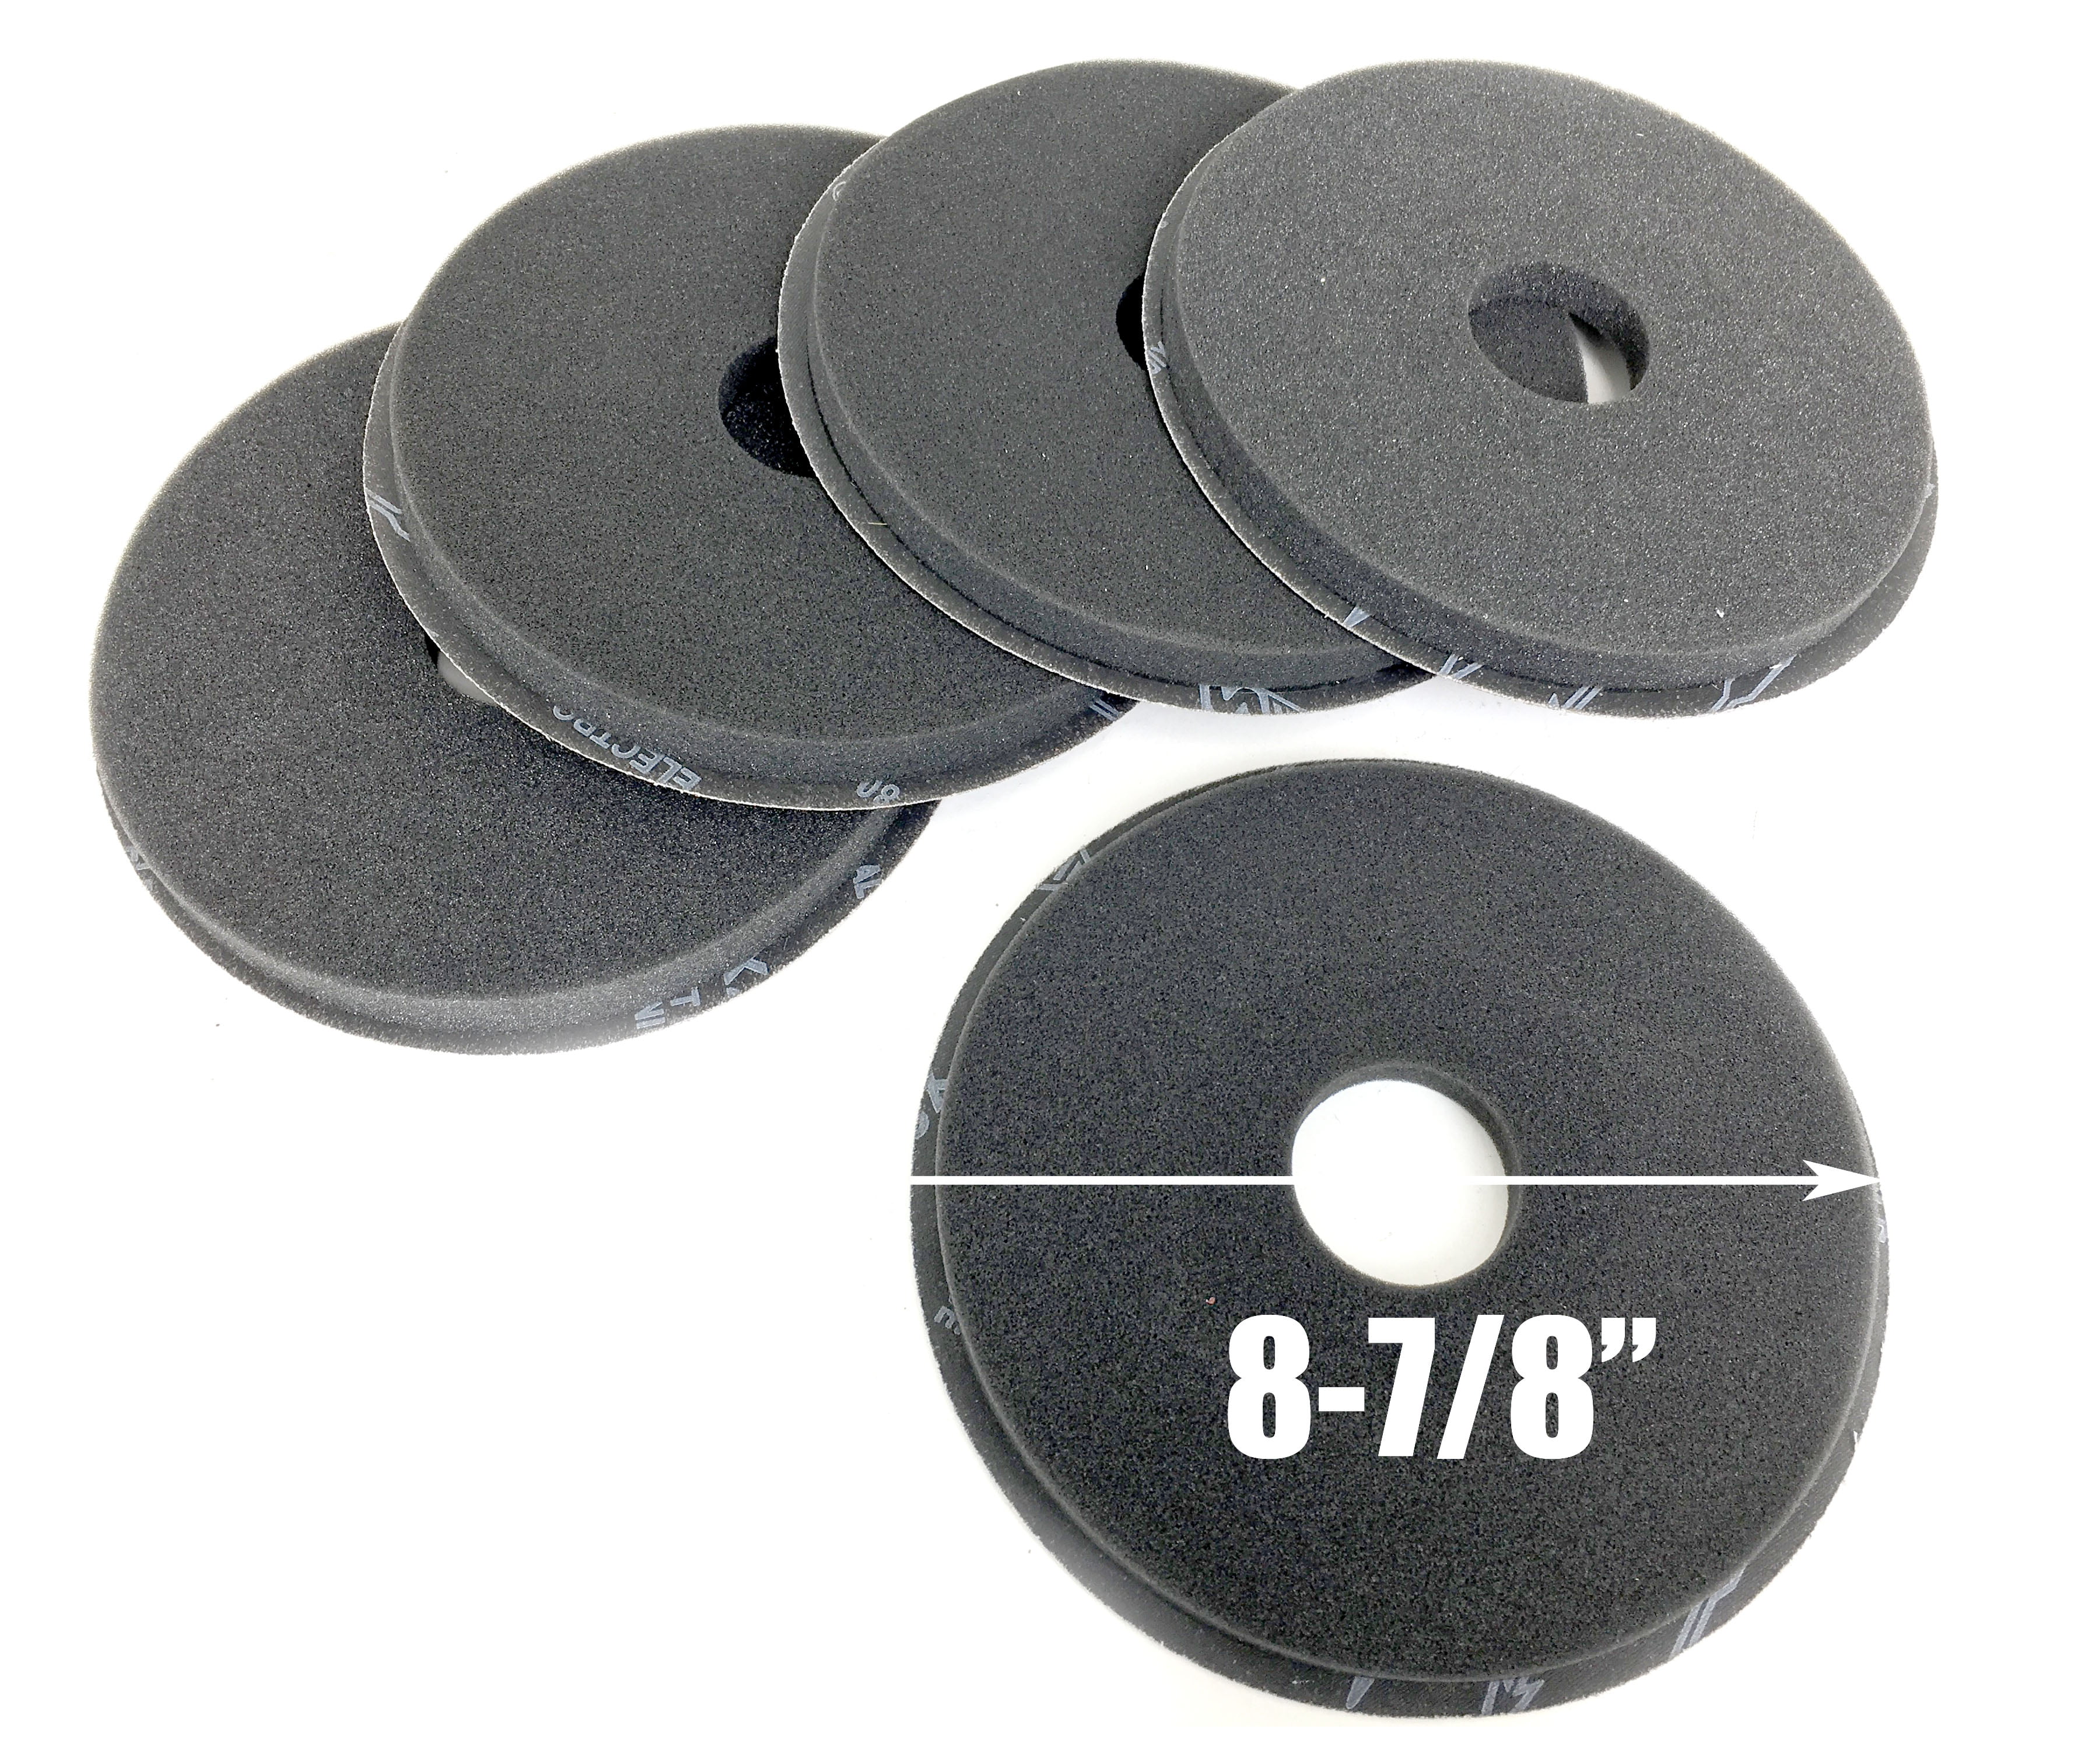 Used with Porter-Cable 7800 Drywall Sander 8-7/8 Drywall Sanding Discs by LotFancy 10PCS 60 80 120 150 220 Grit Foam-Backed Abrasive Pads Assortment